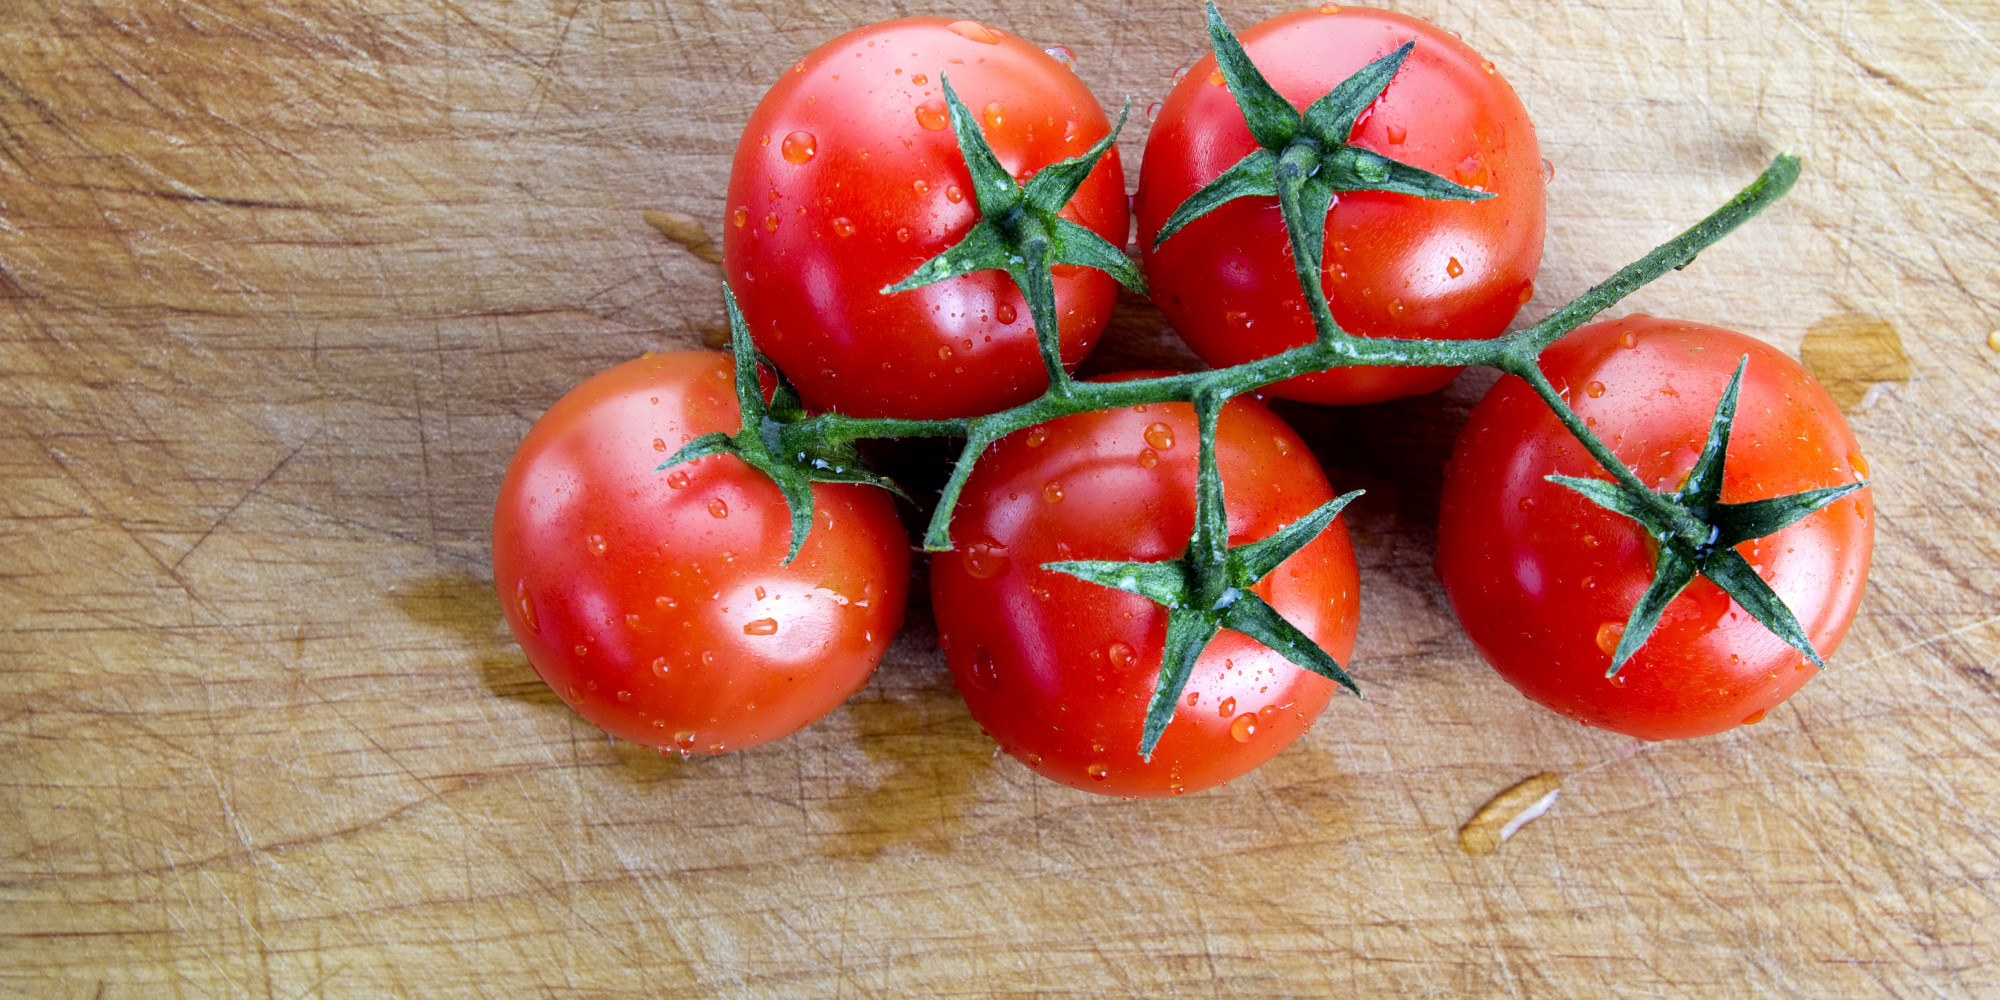 Tomato-Rich Diet Could Help Protect Against Breast Cancer, Small Study Suggests | HuffPost